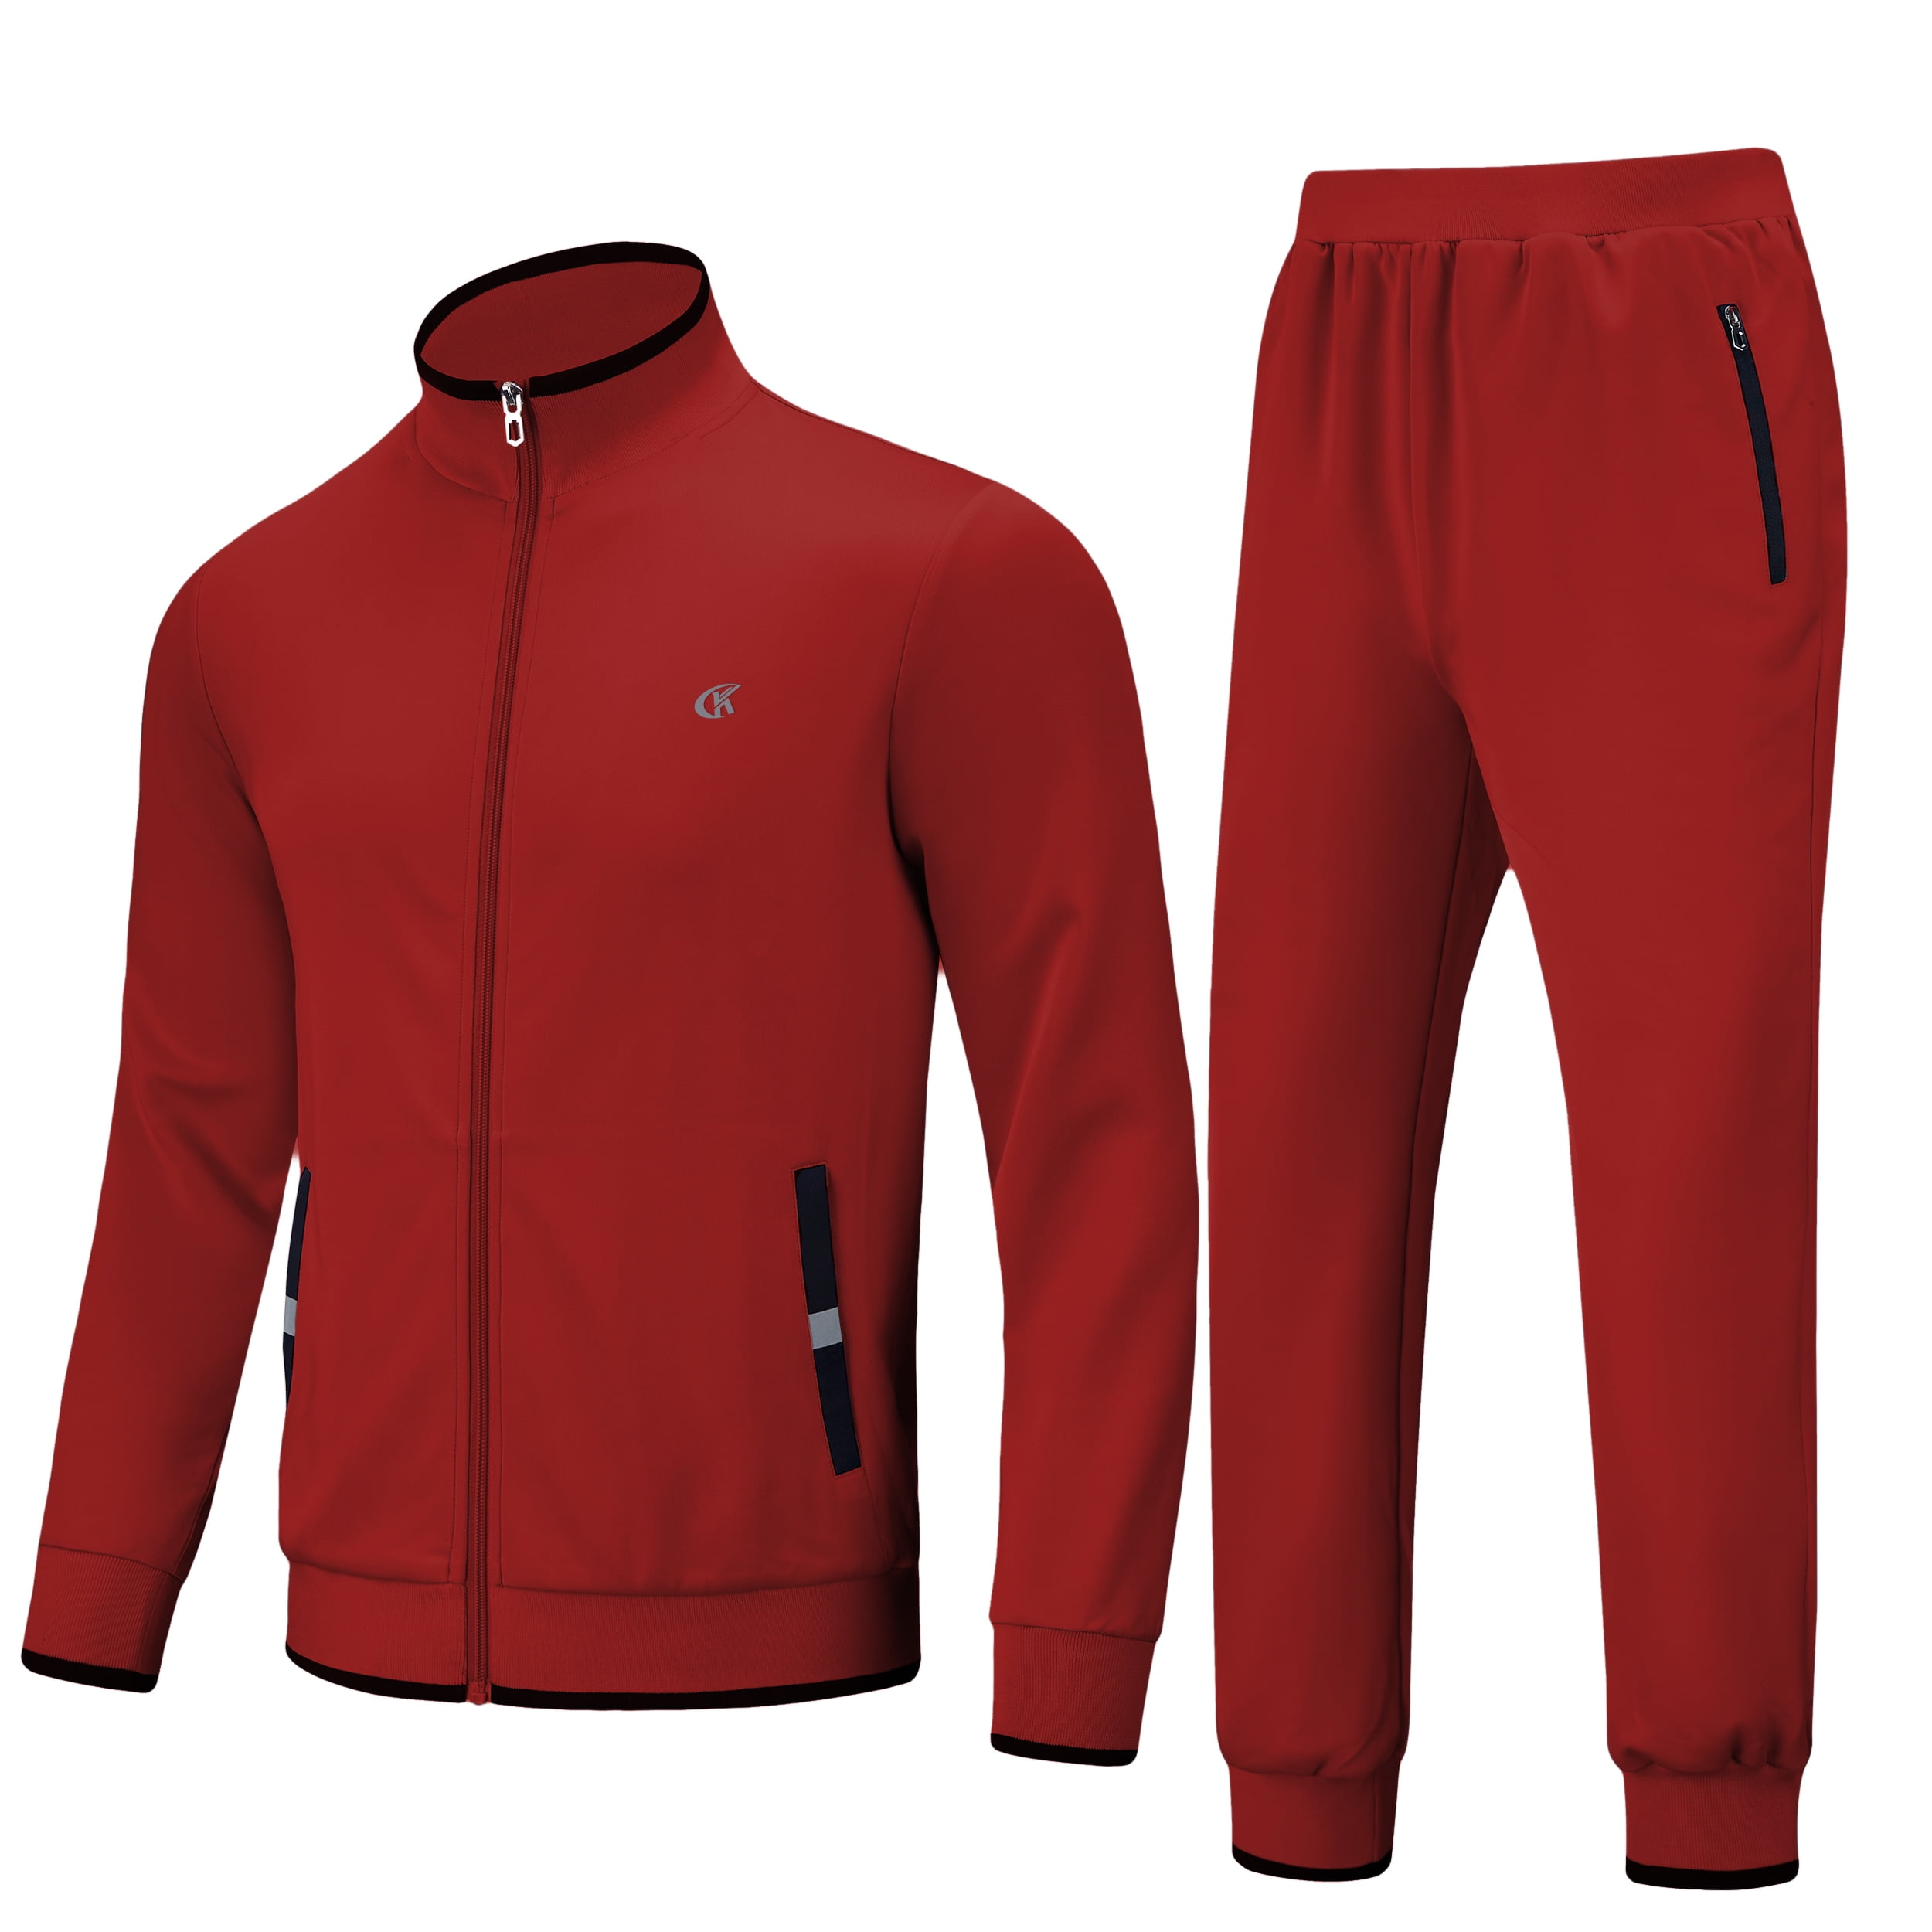 Mens tracksuit 2 pieces,Athletic sweatsuit for men Outfit,Big and Tall  Casual Hoodie jogger set(Red,5xl)